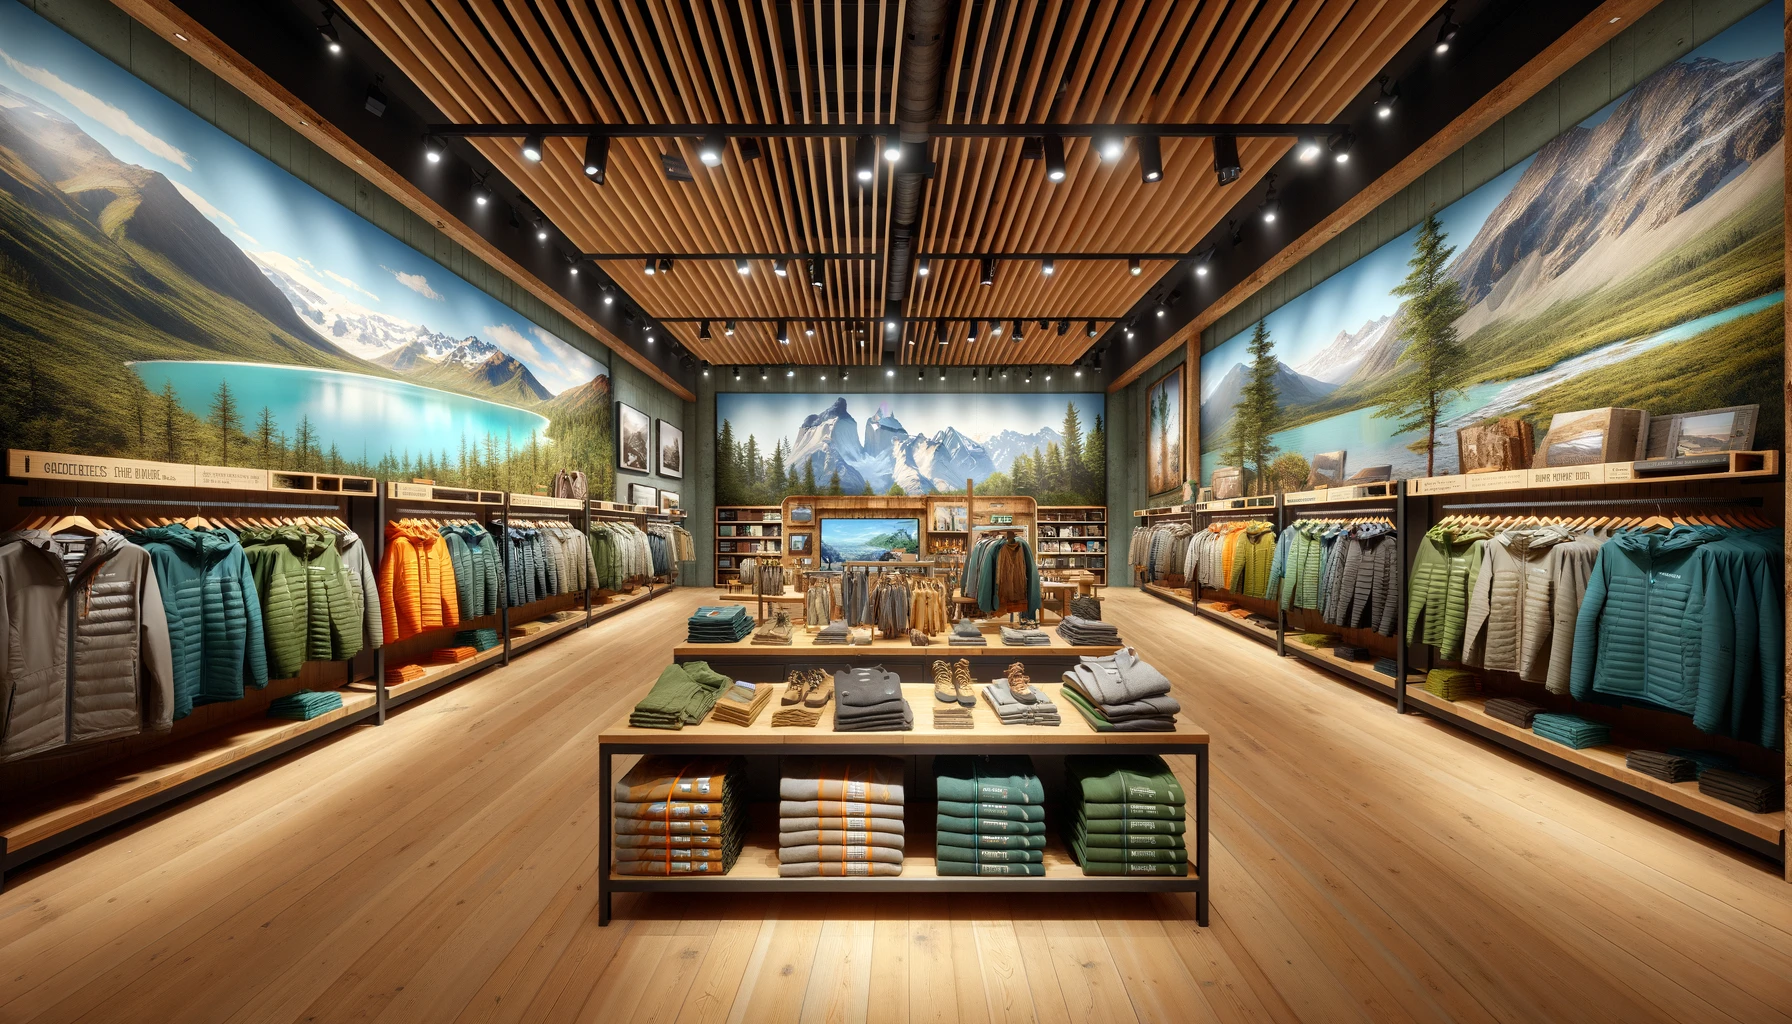 Outdoor store floor with outdoor clothes and outdoor decor